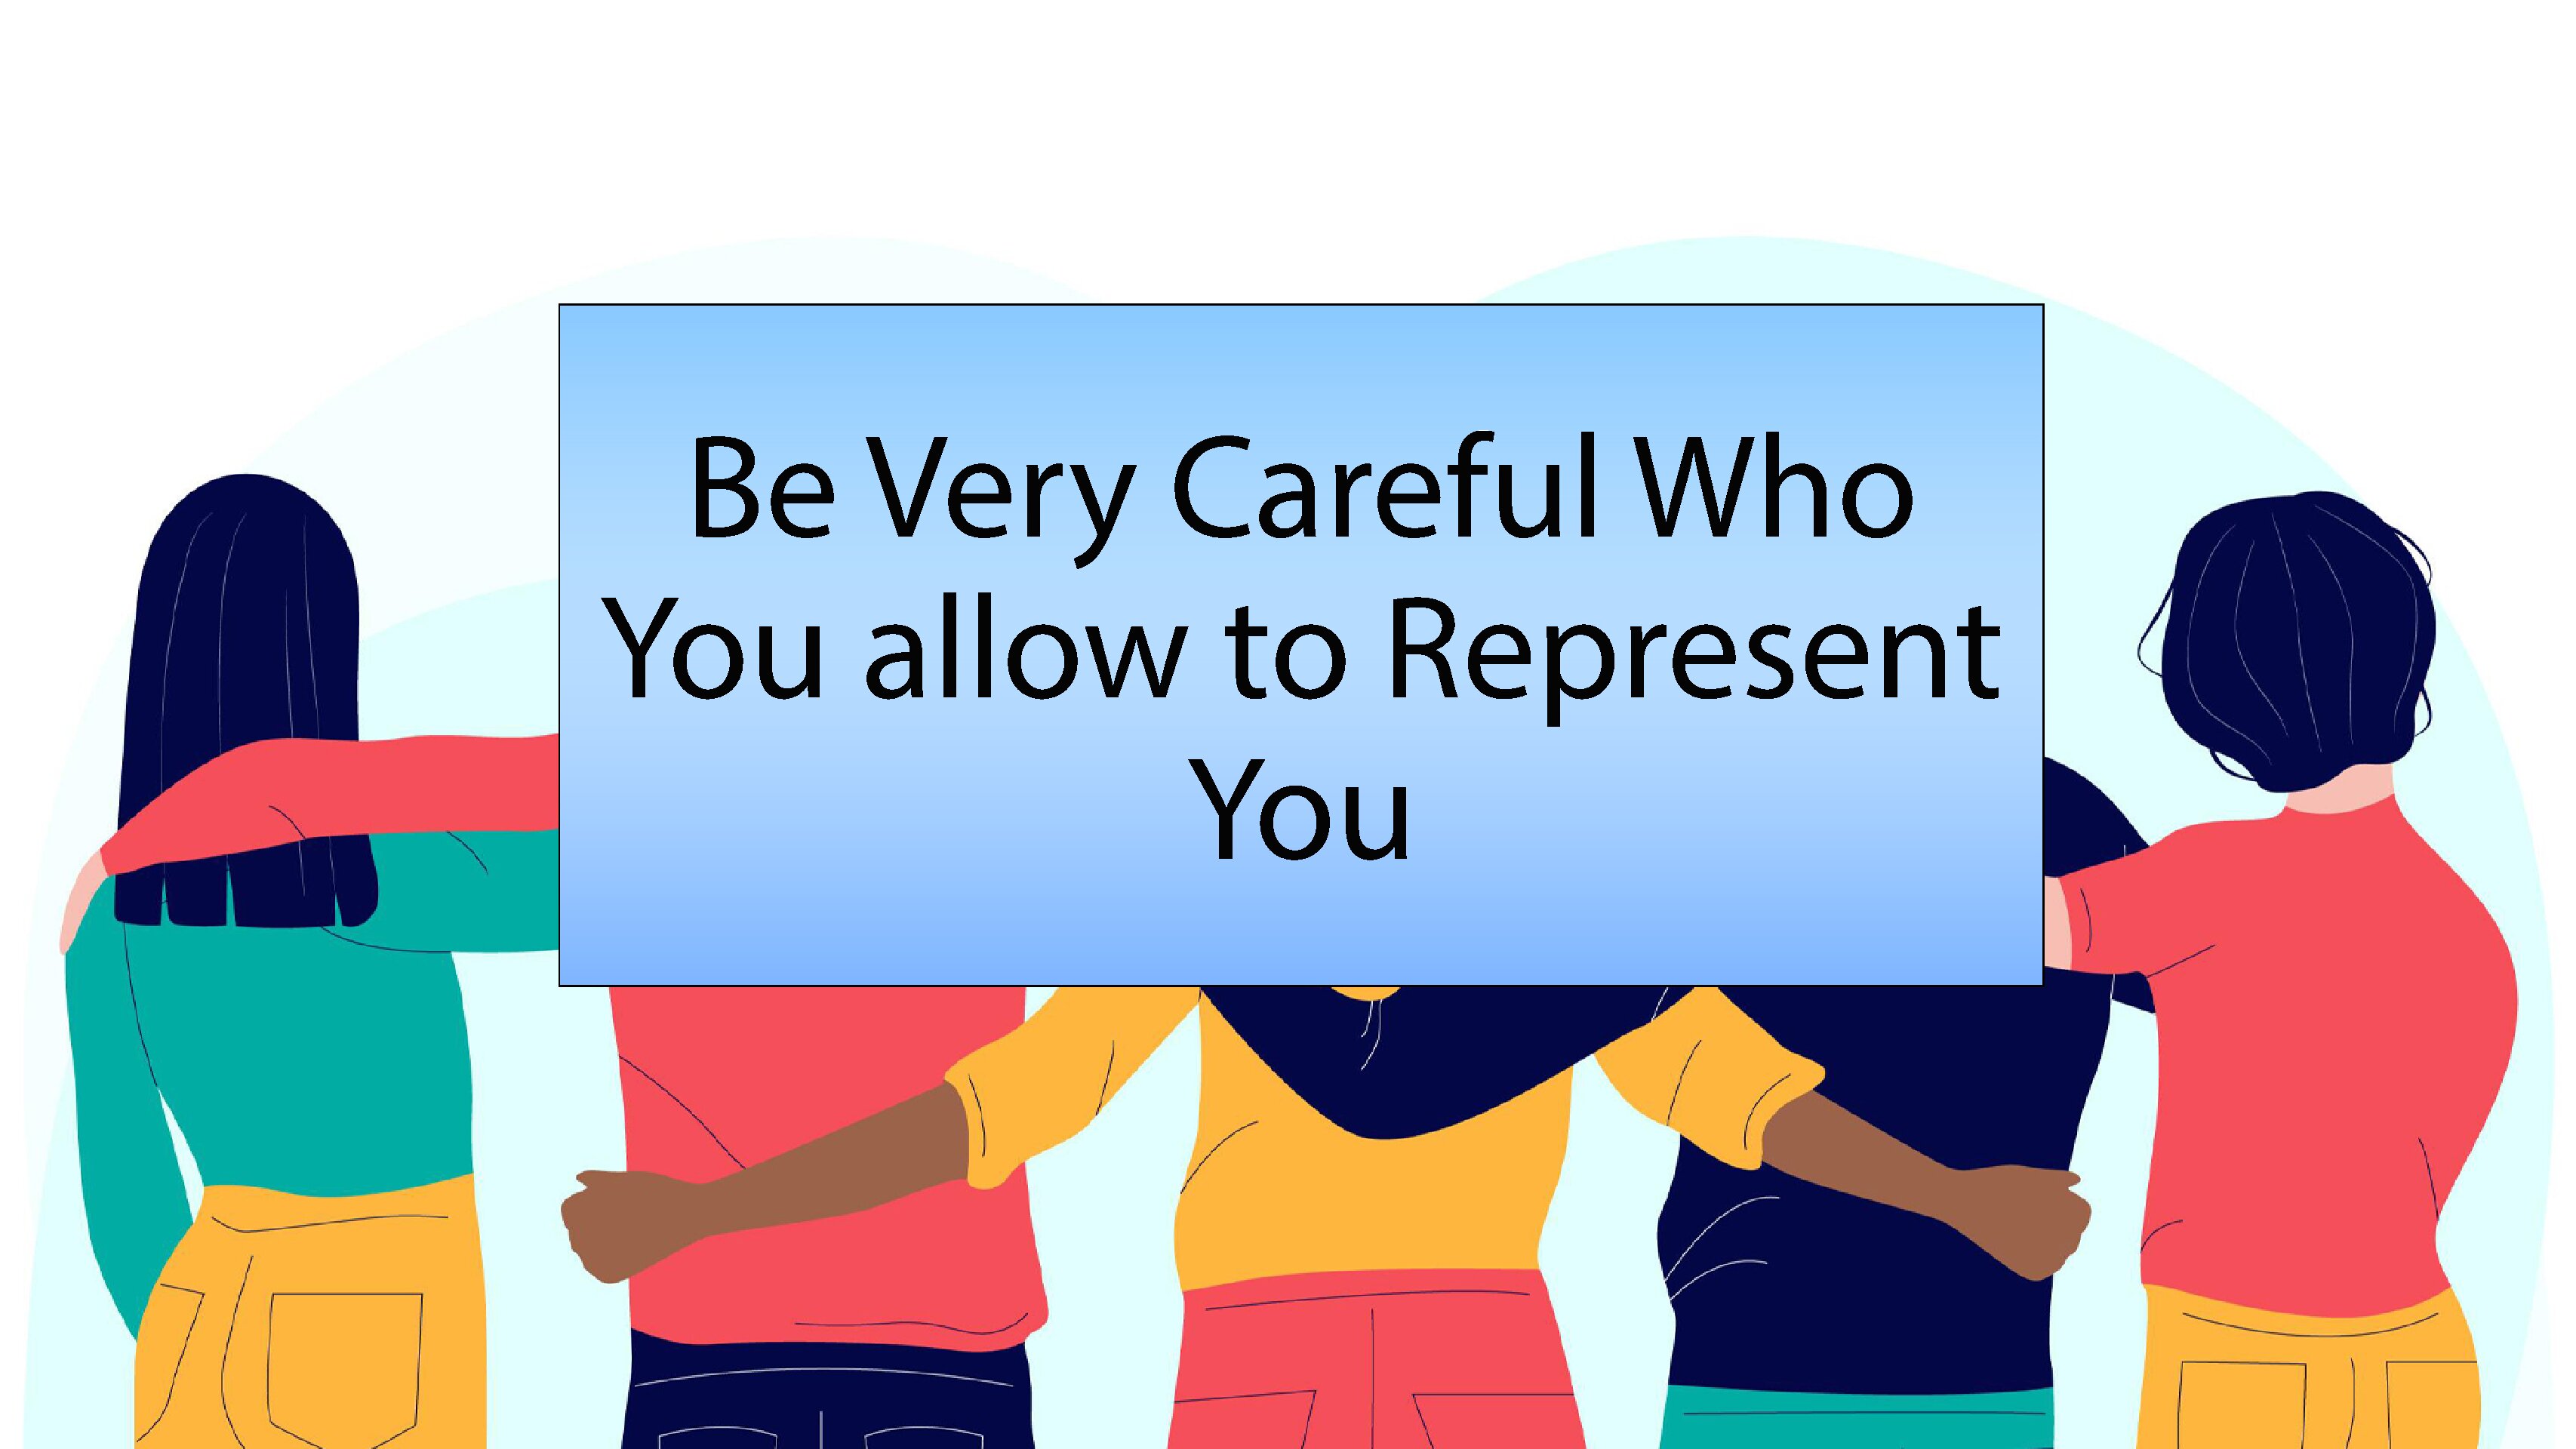 Be Very Careful Who You Allow to Represent You